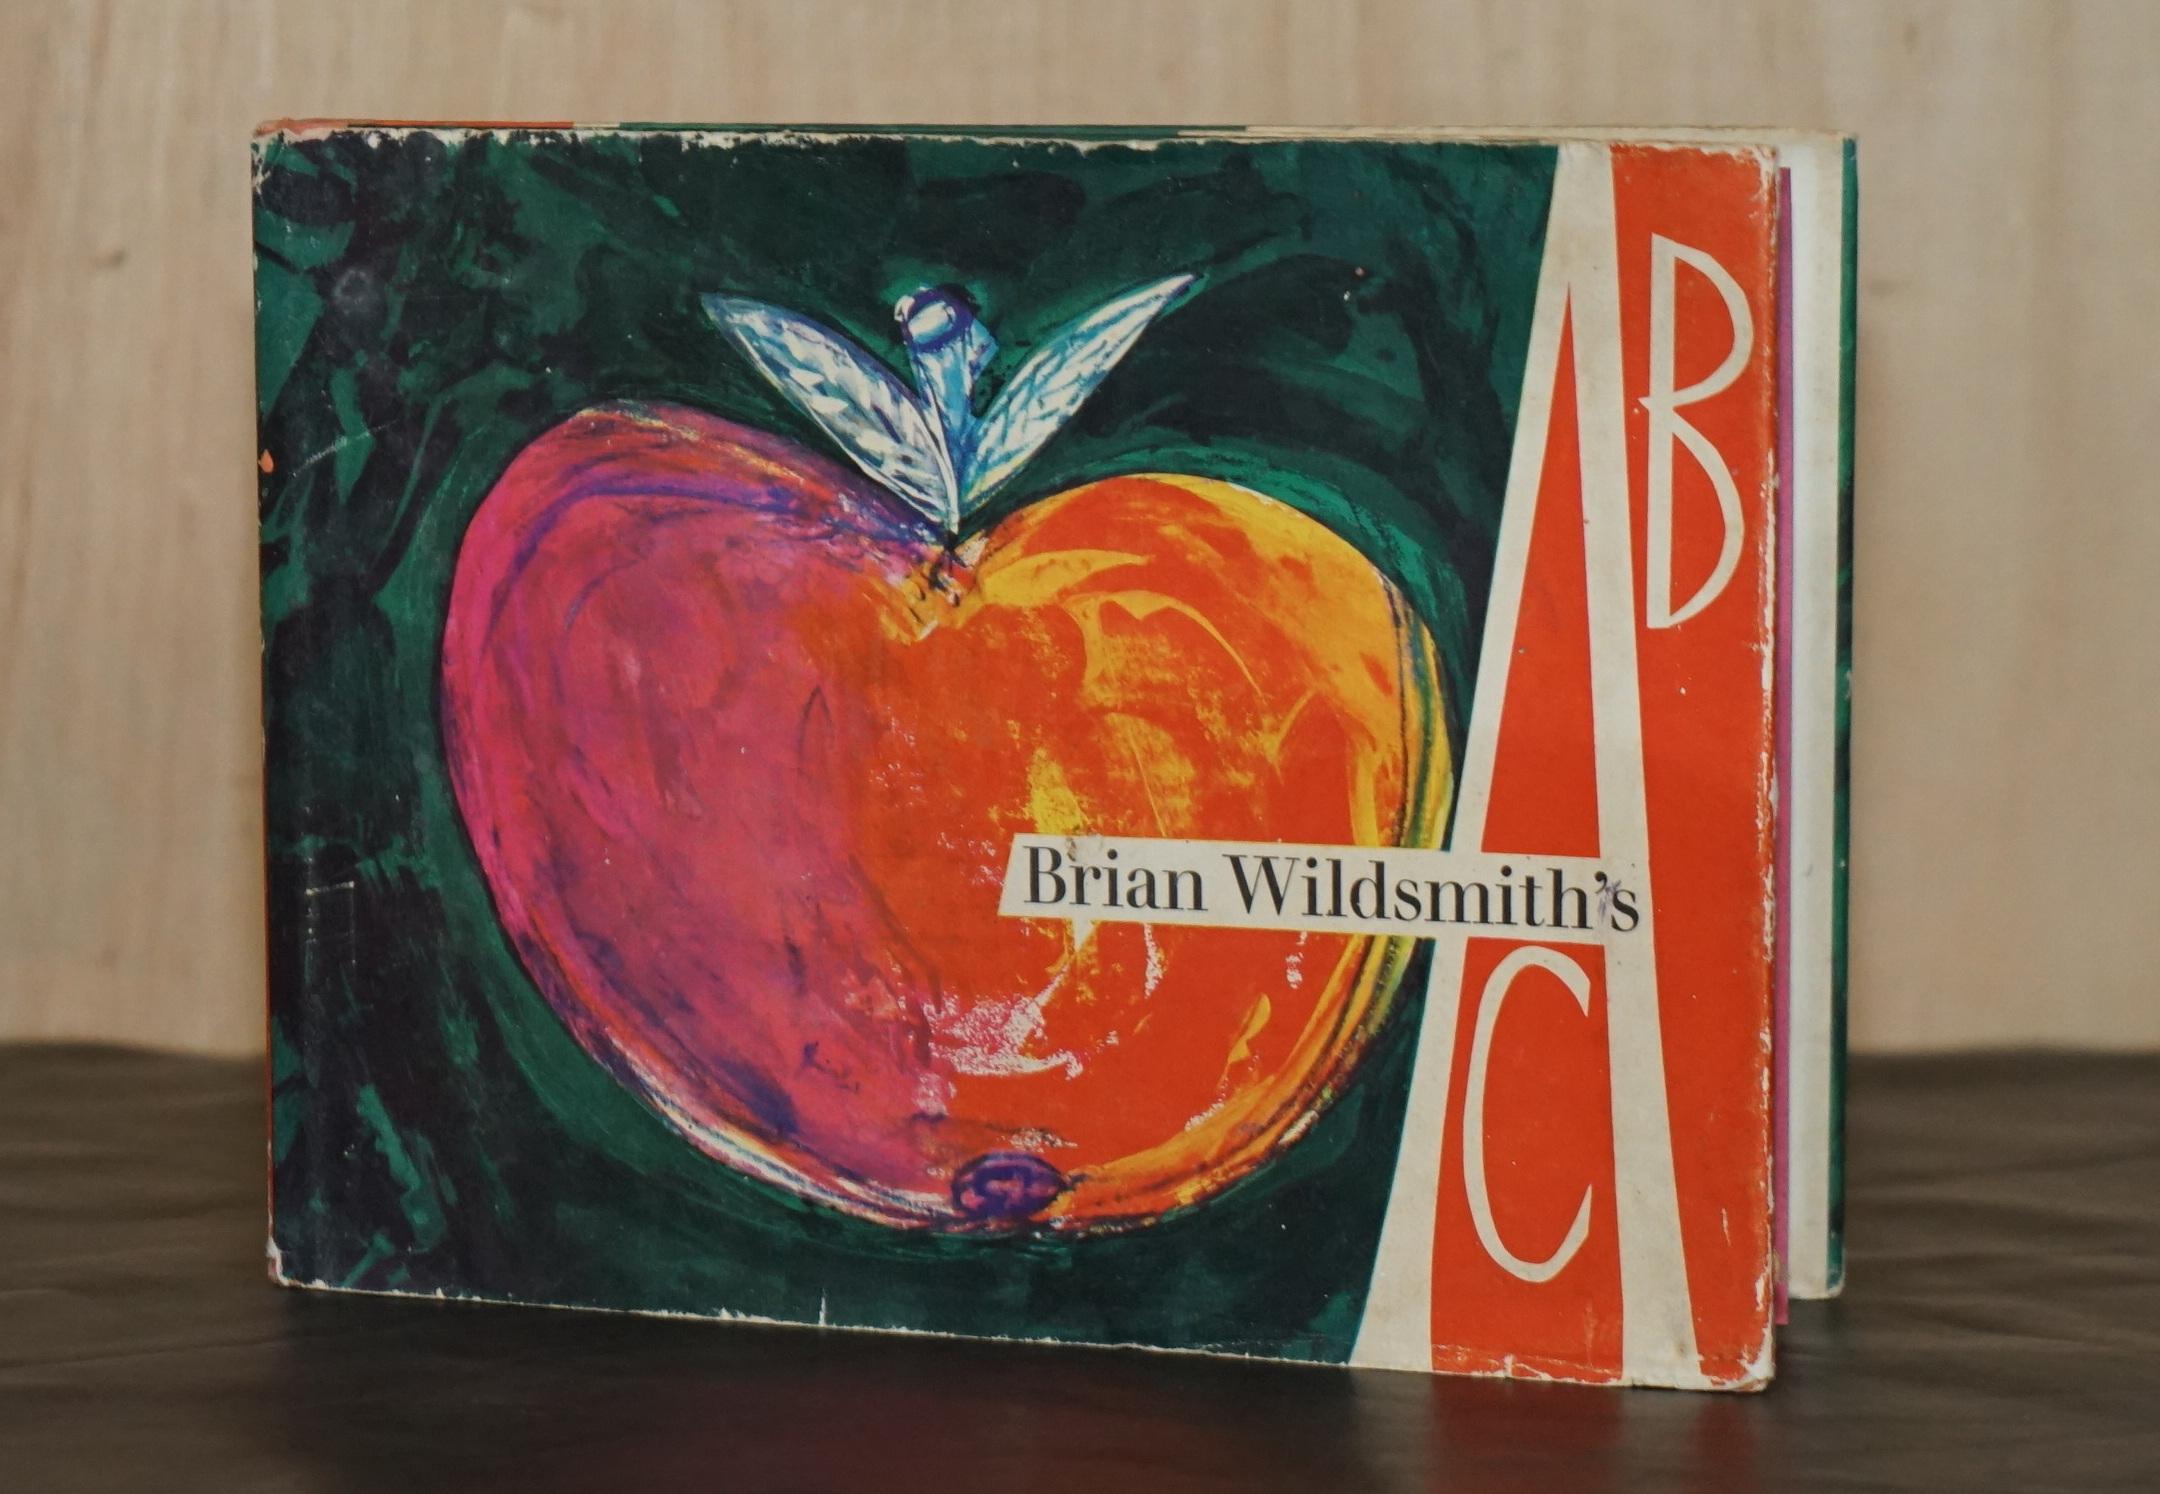 Royal House Antiques

Royal House Antiques is delighted to offer for sale this very rare, highly collectable original 1st Edition signed Brian Wildsmith 1962 children’s A.B.C book

Brian Wildsmith was one of the first artists in the 1960s to